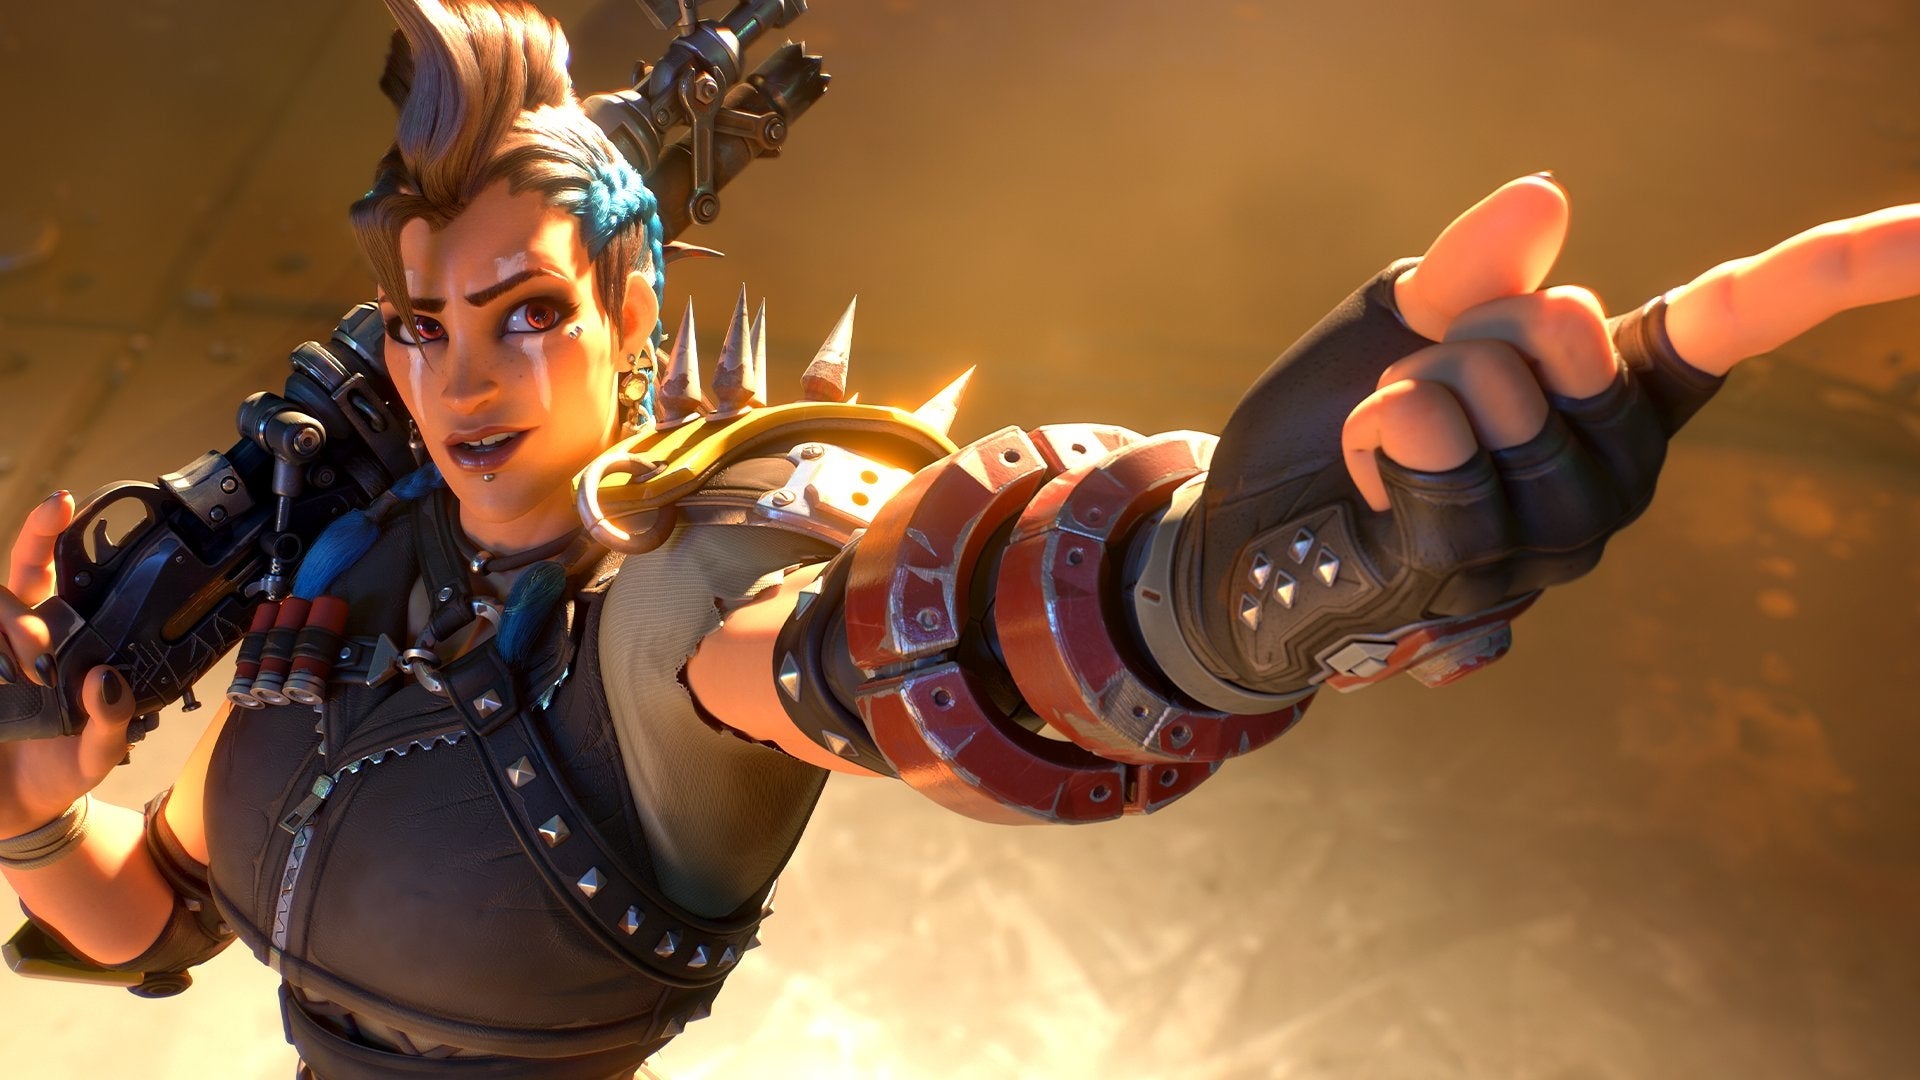 Overwatch 2 launches on October 4th and introduces new tank hero Junker Queen.